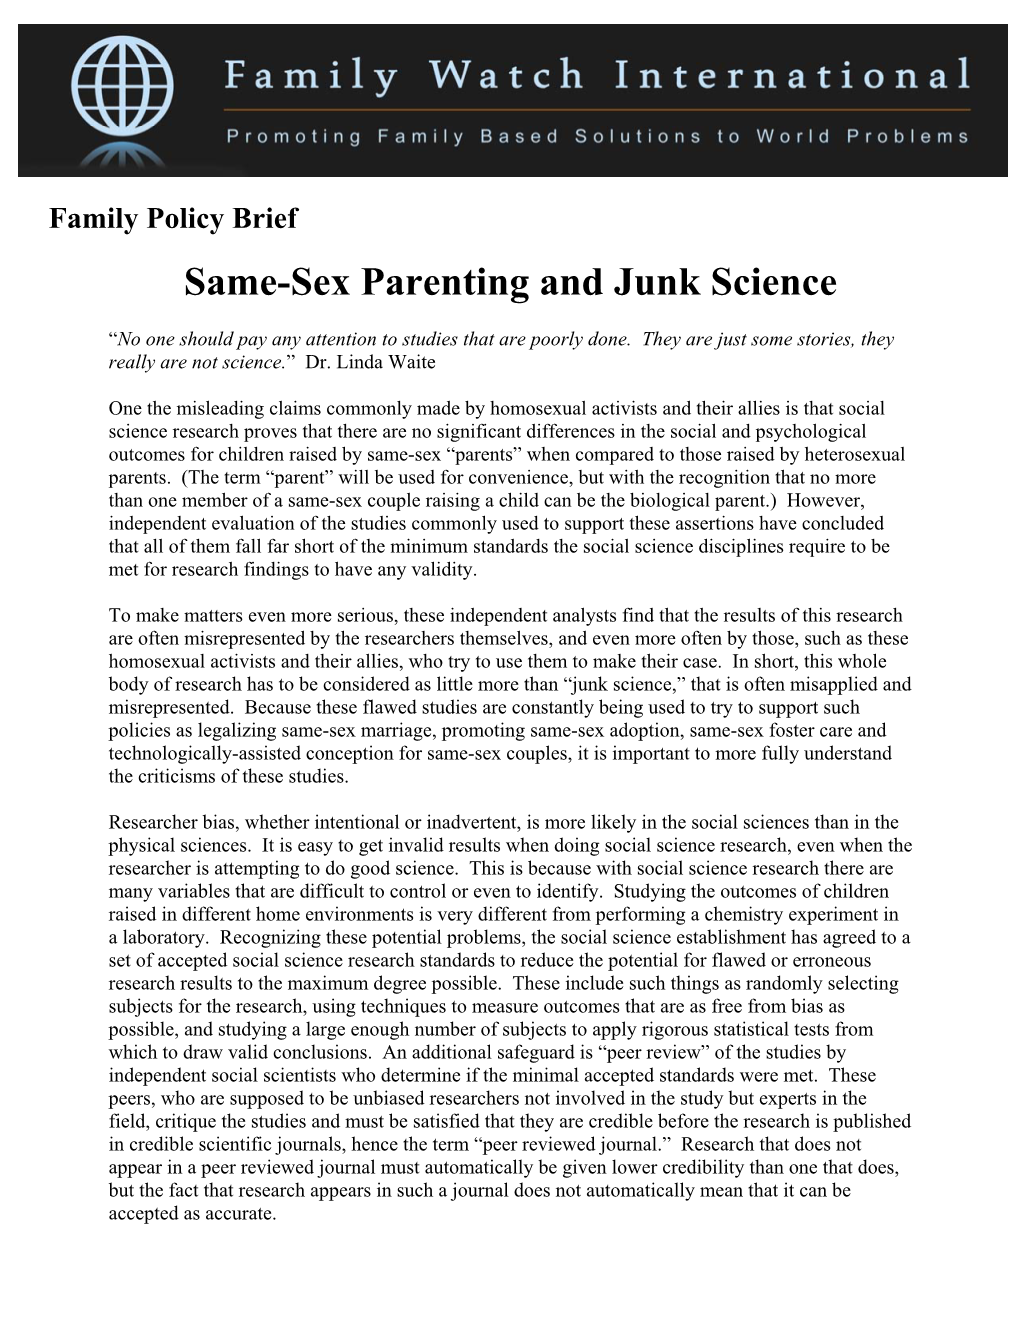 Same-Sex Parenting and Junk Science